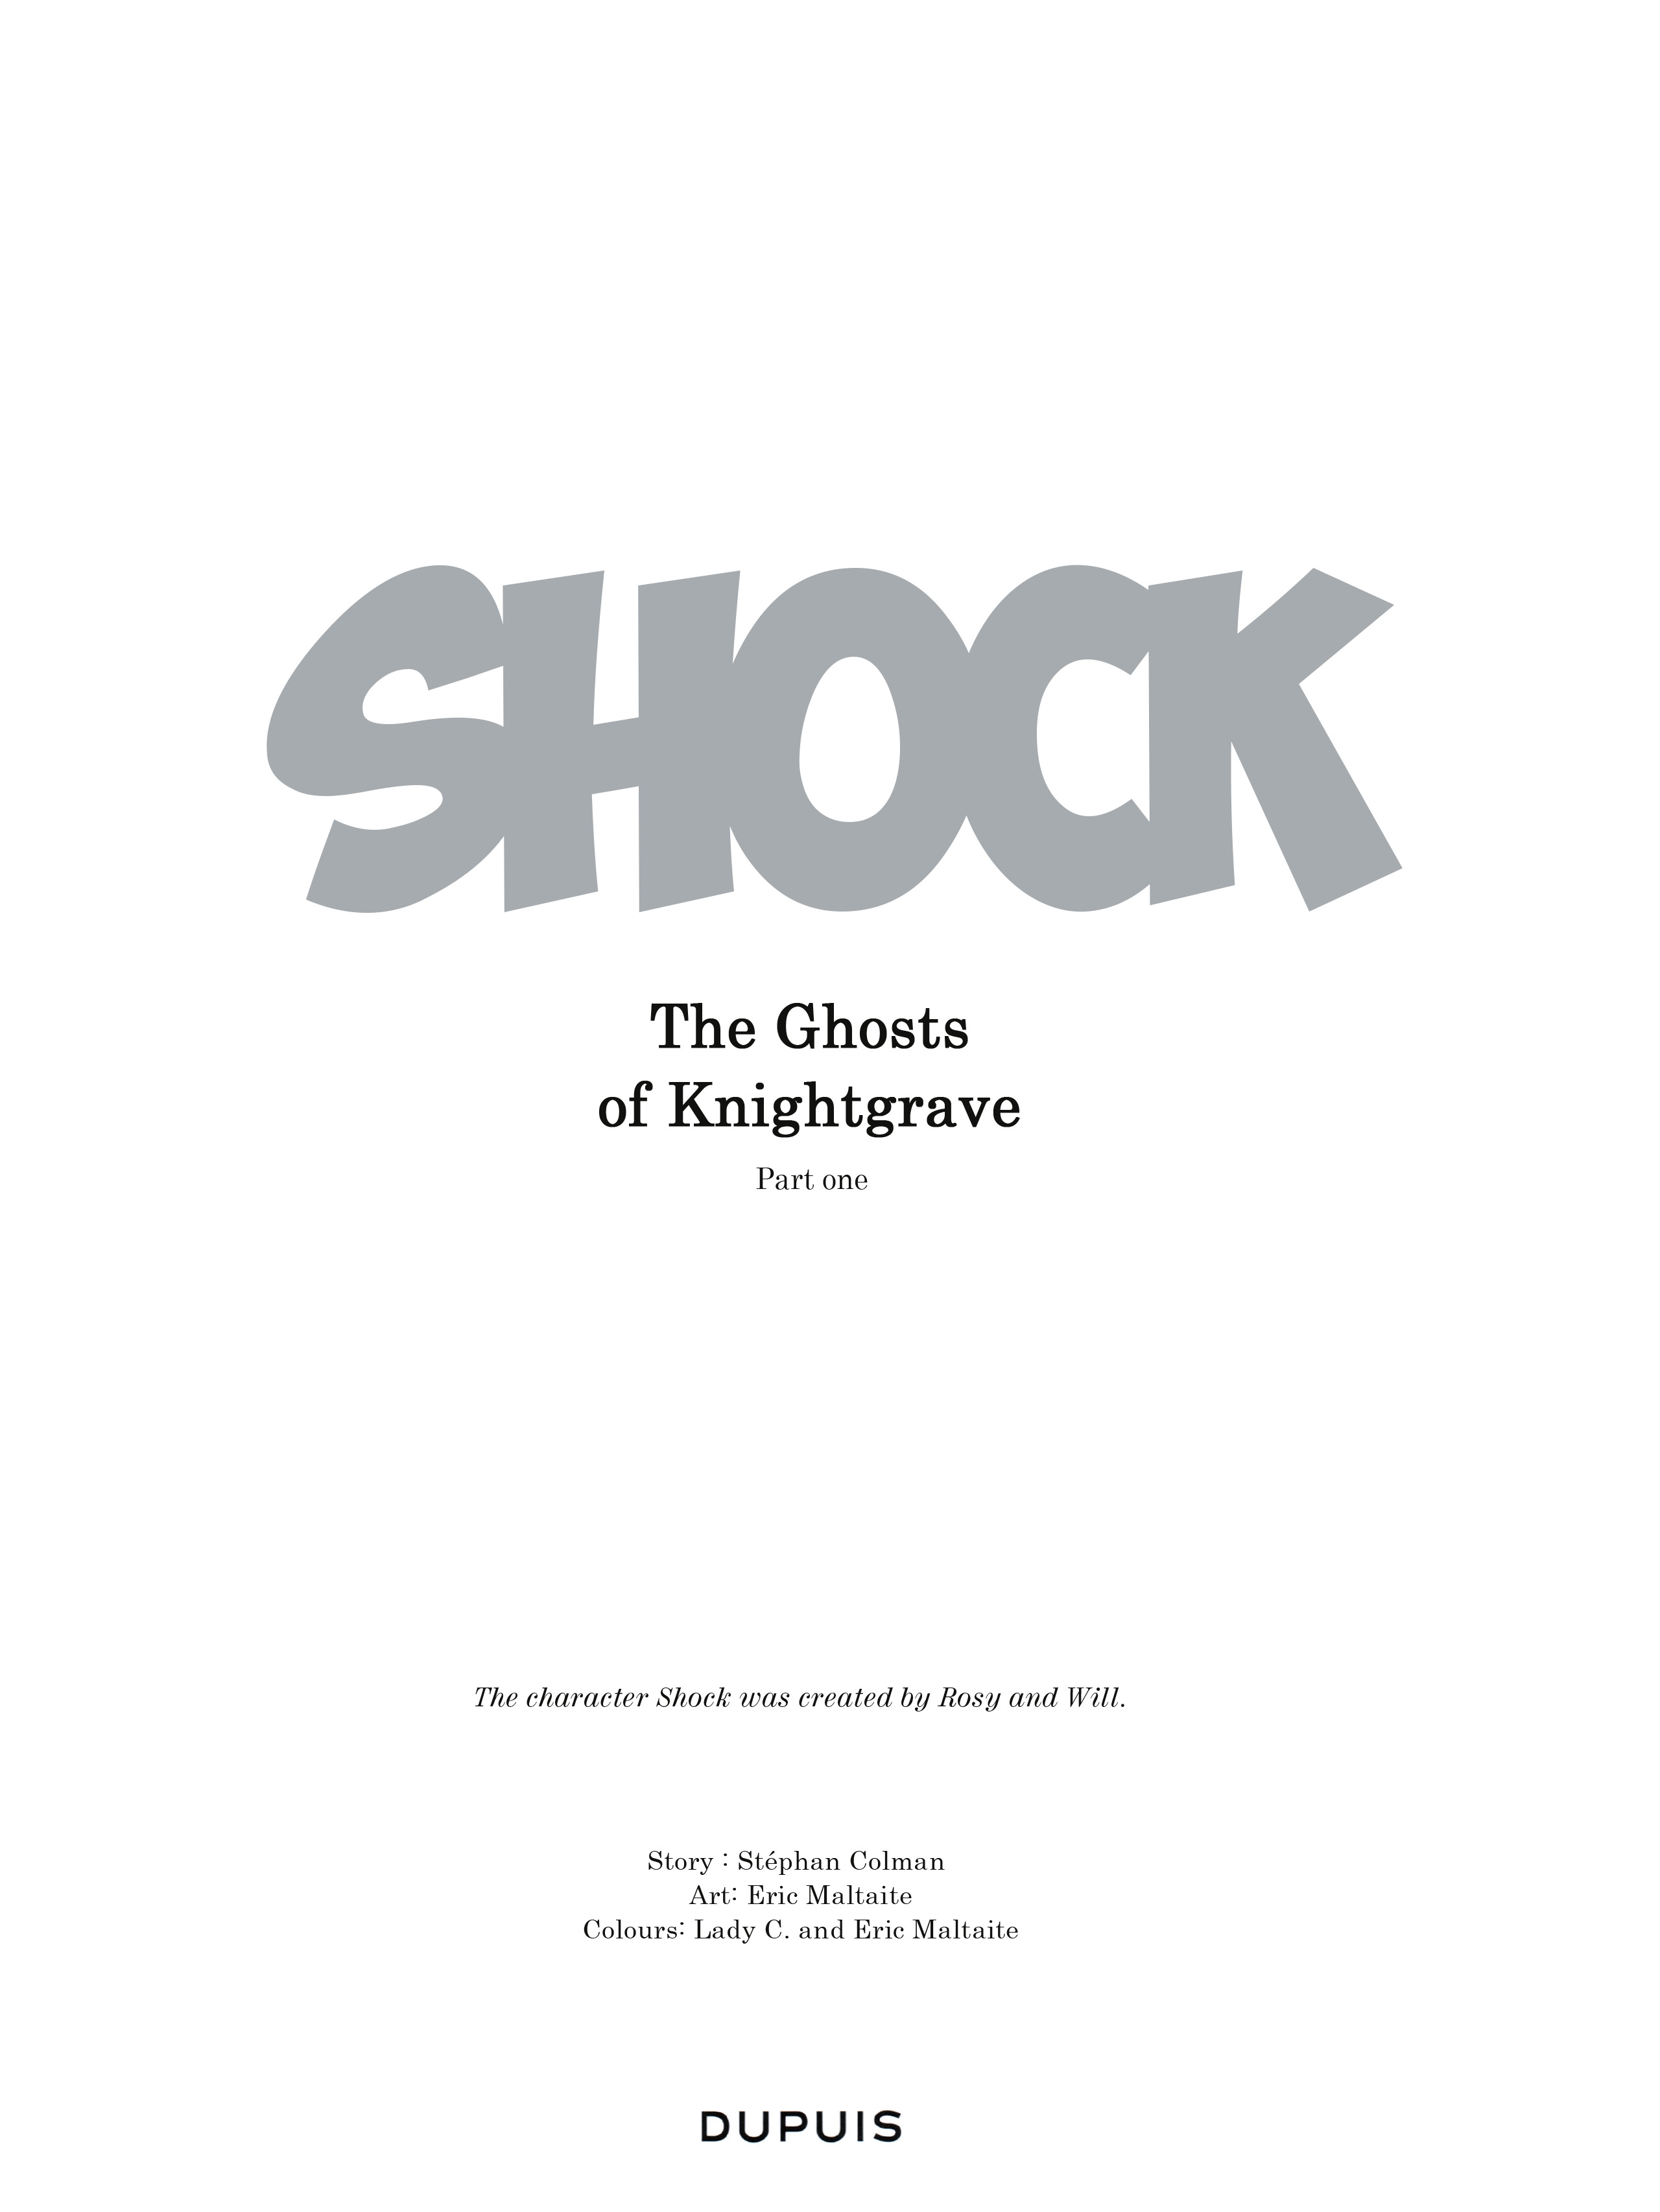 Read online Shock: The Ghosts of Knightgrave comic -  Issue # TPB 1 - 4